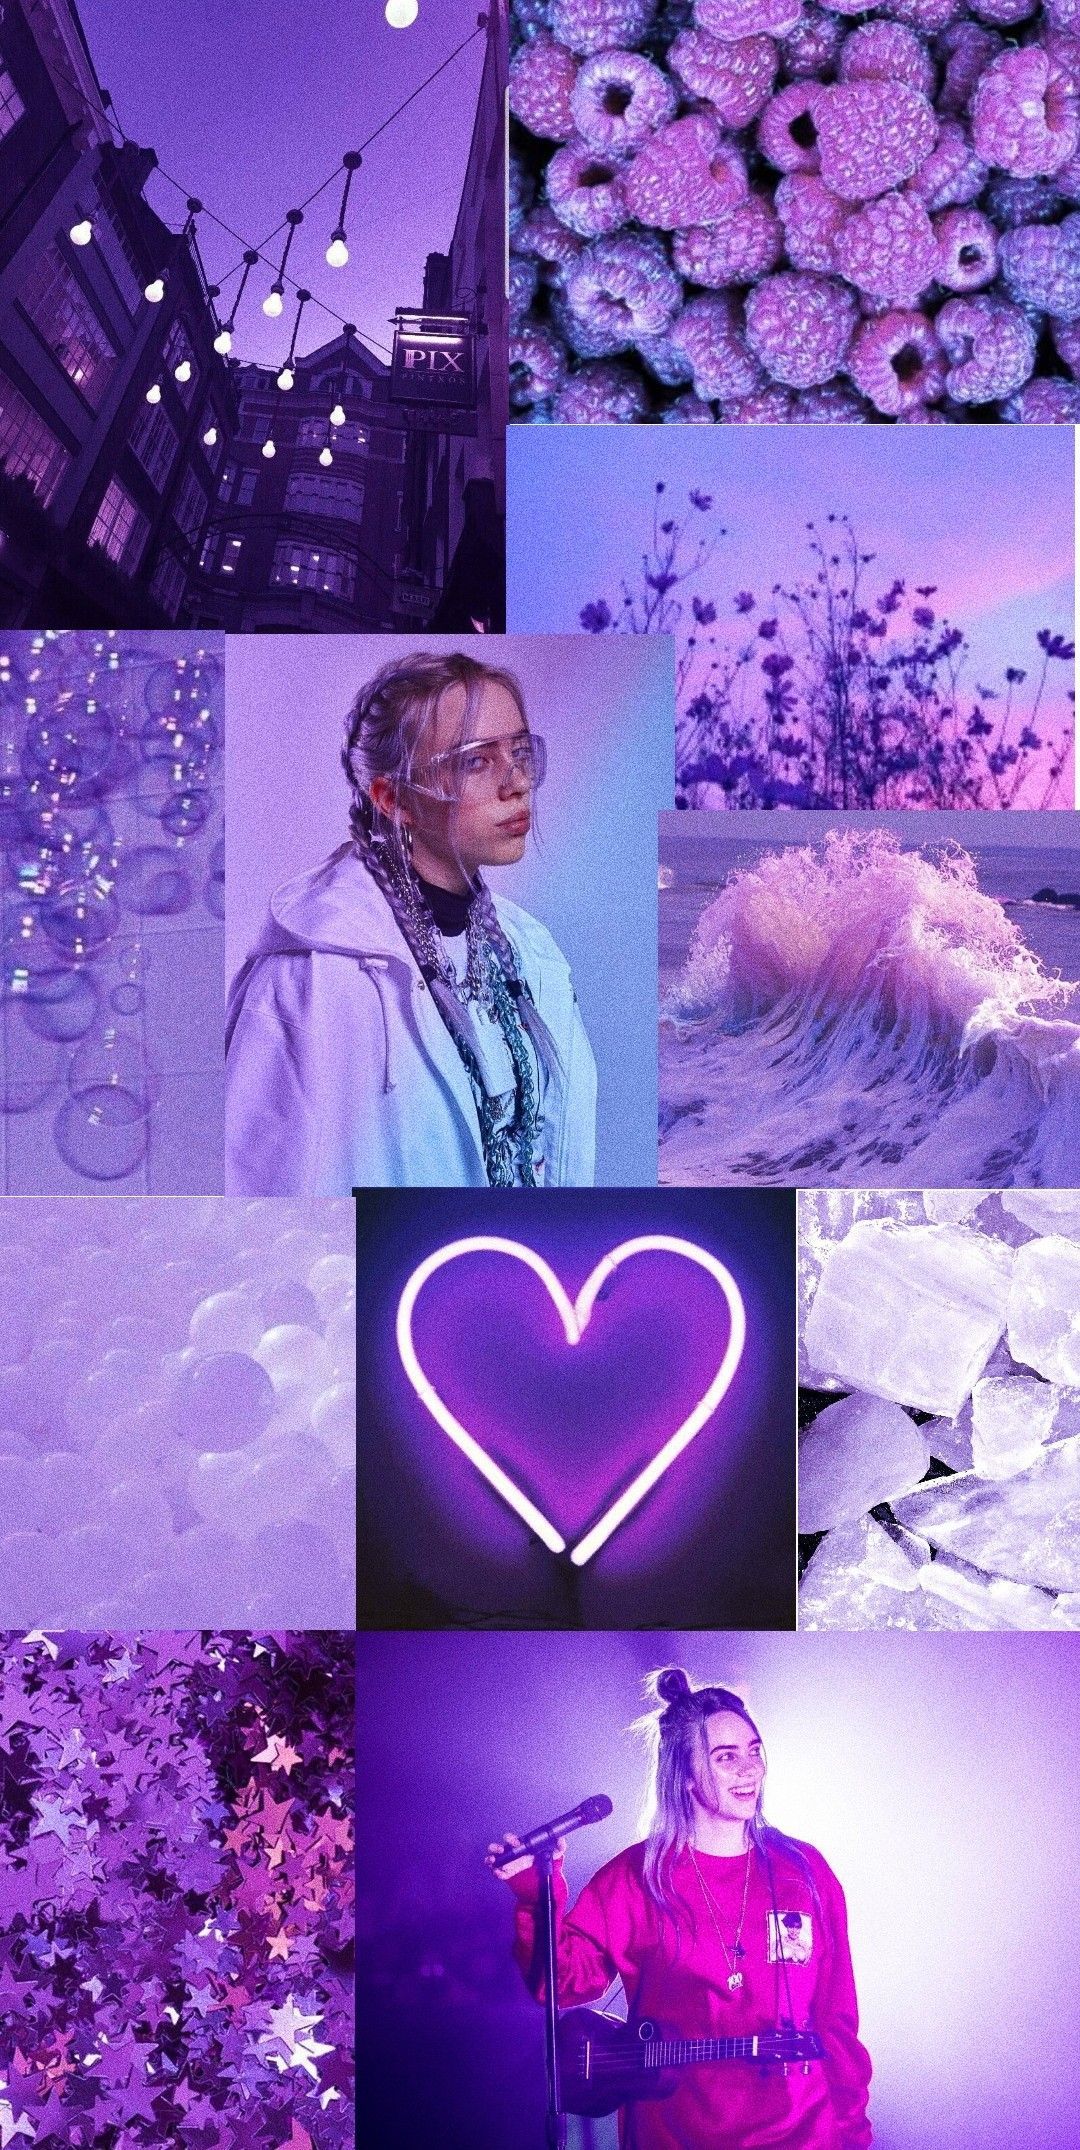 Aesthetic purple phone background with images of Billie Eilish, flowers, and a heart - Purple, lavender